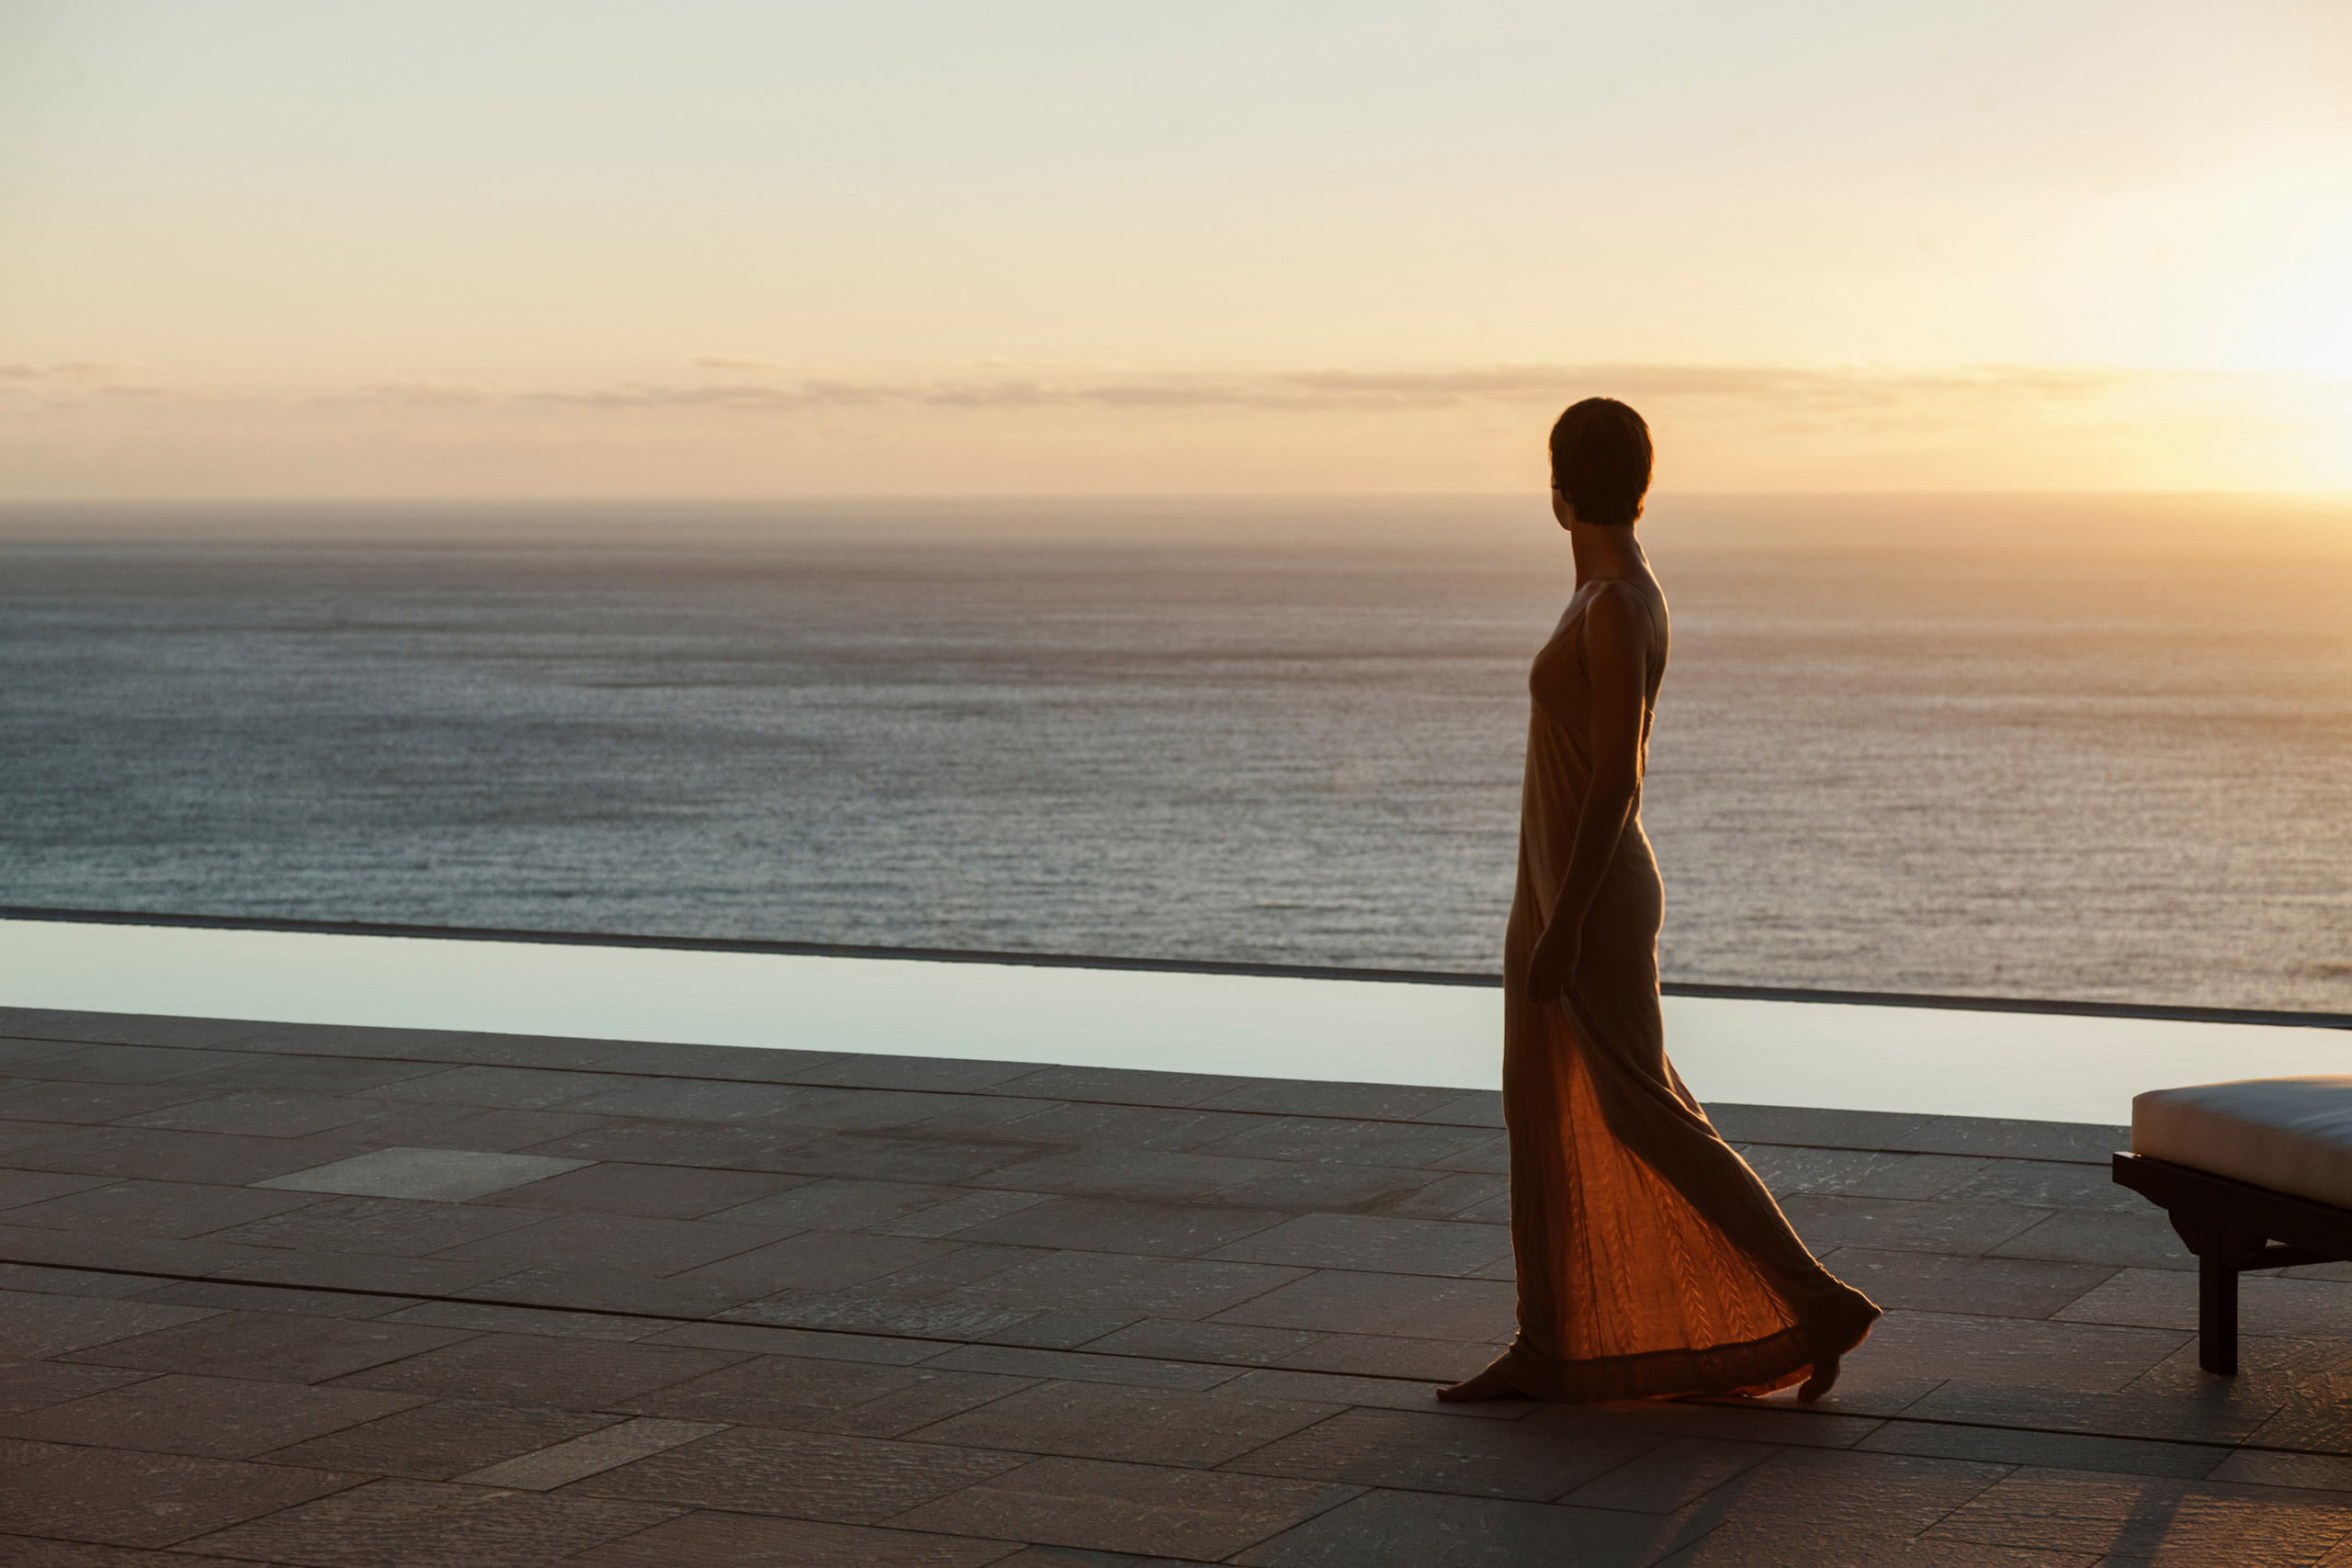 Silhouette of a woman in an elegant dress standing by an infinity pool overlooking the sea at sunset.